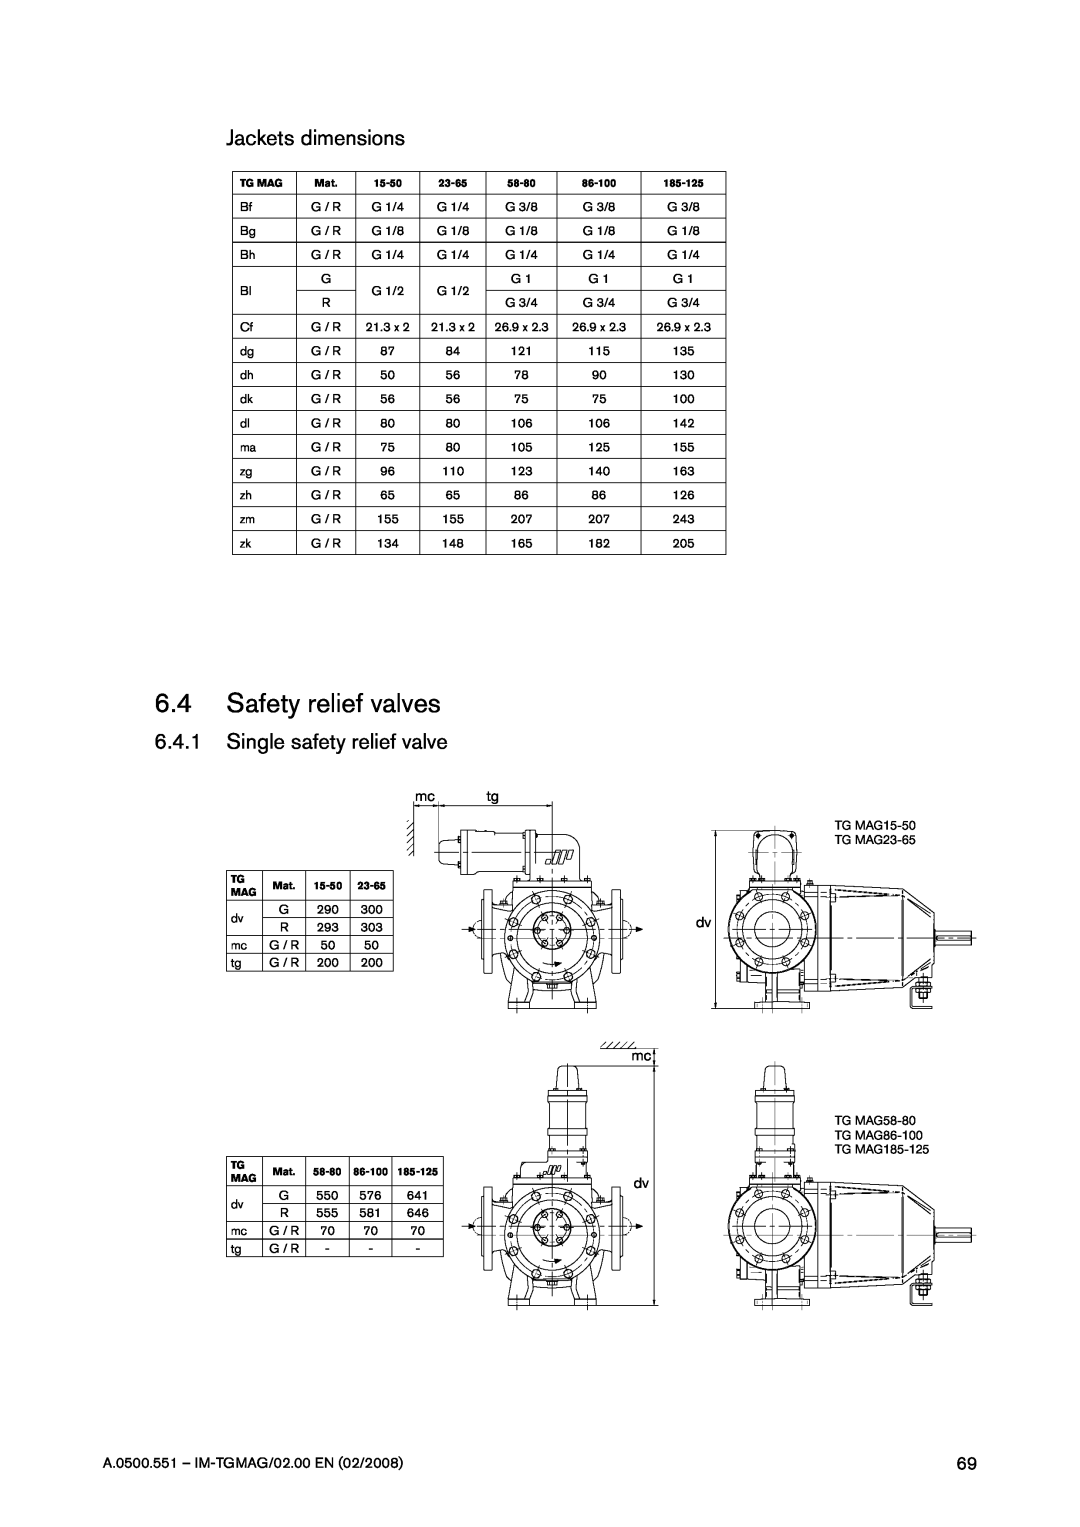 SPX Cooling Technologies TG MAG86-100 6.4Safety relief valves, Jackets dimensions, 6.4.1Single safety relief valve 